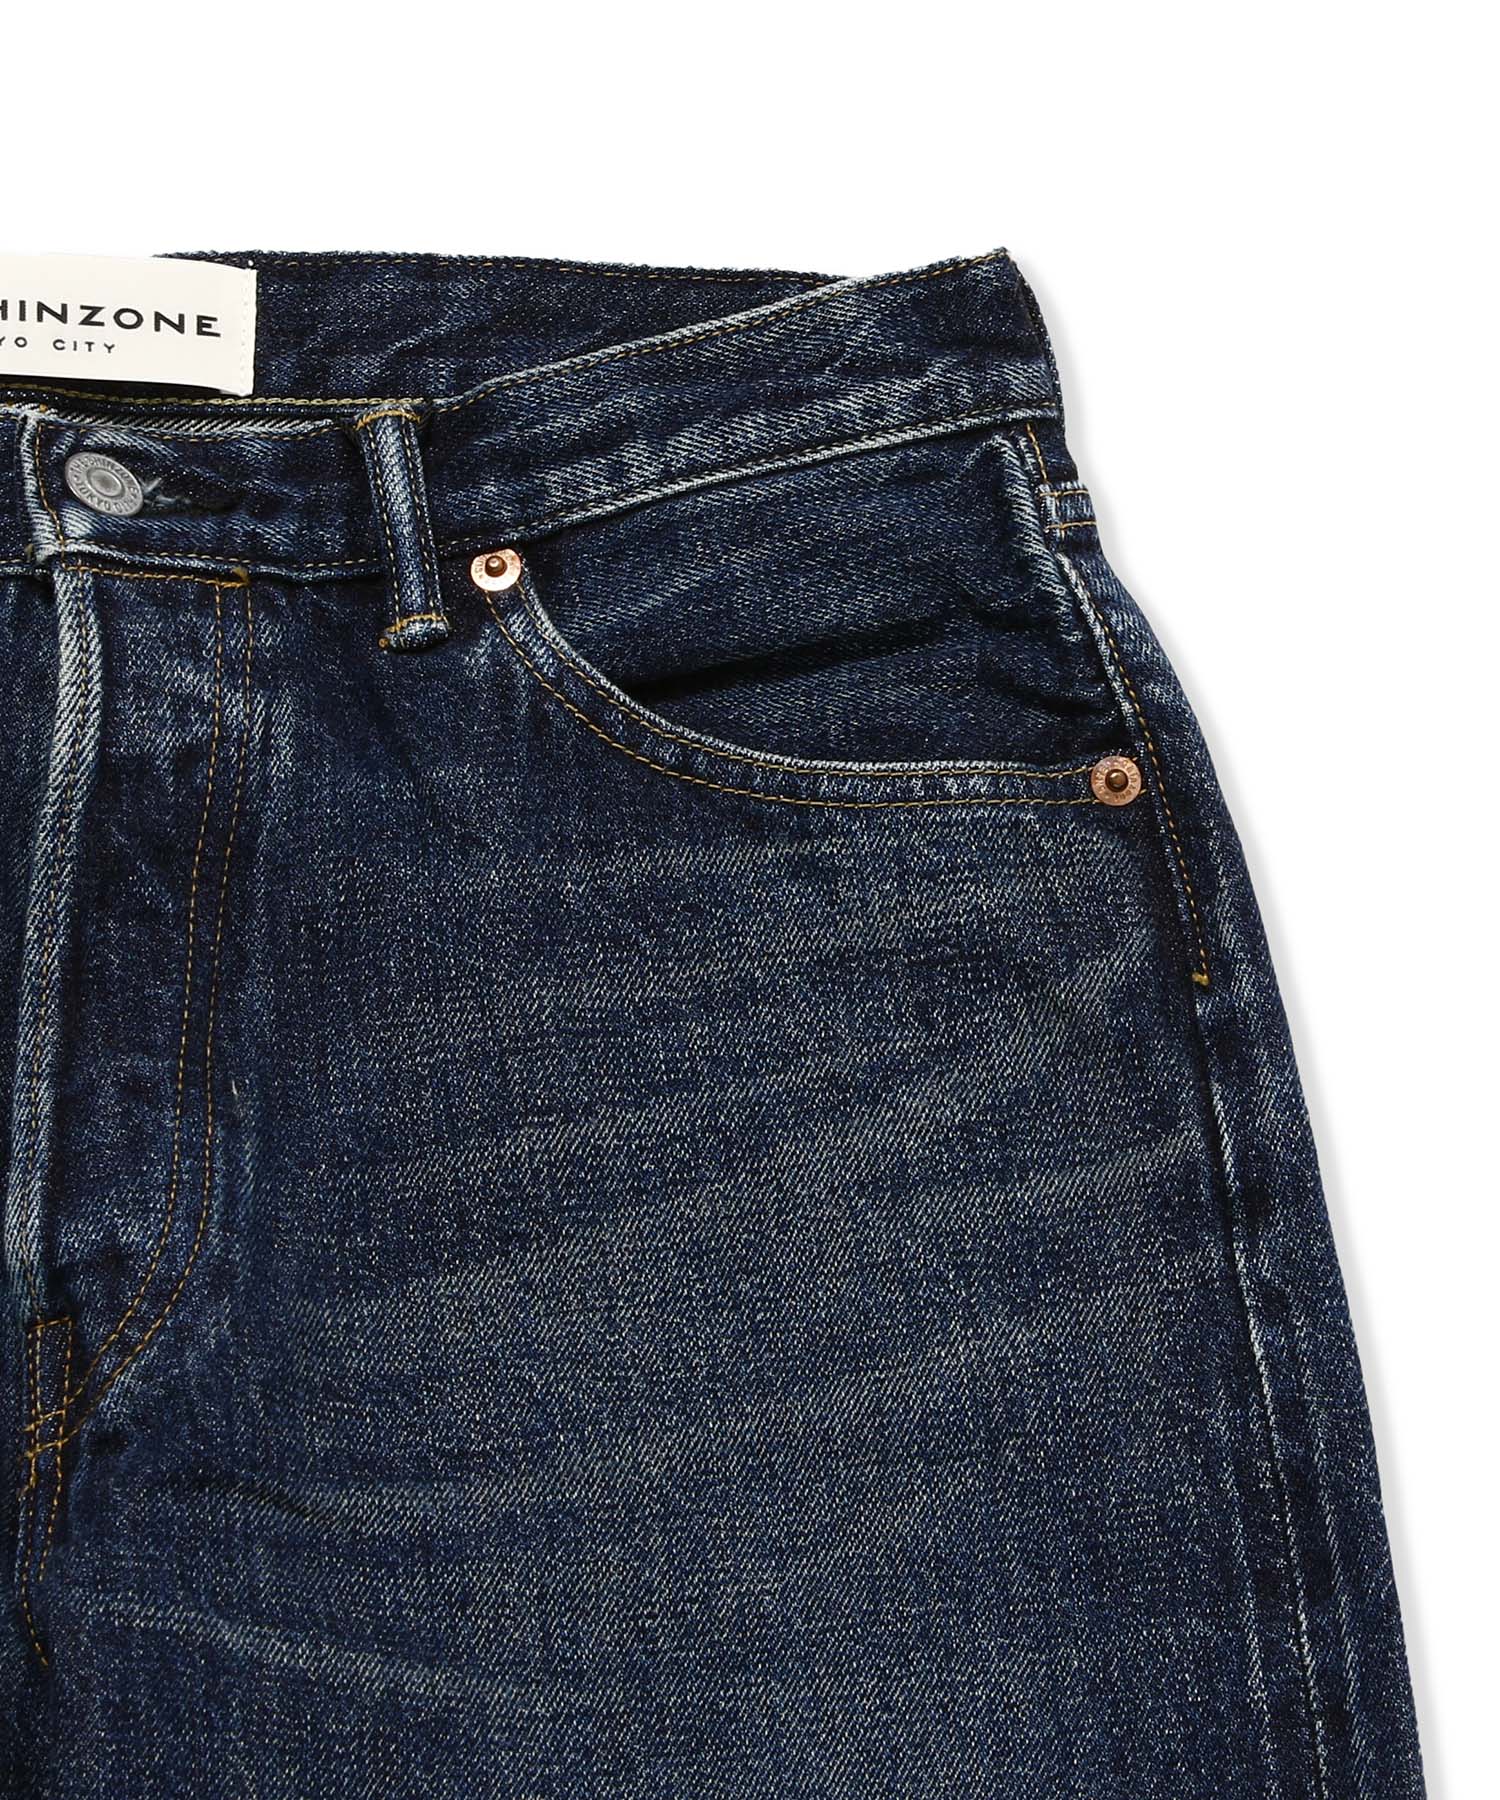 Ordinary Jeans (BLUE)